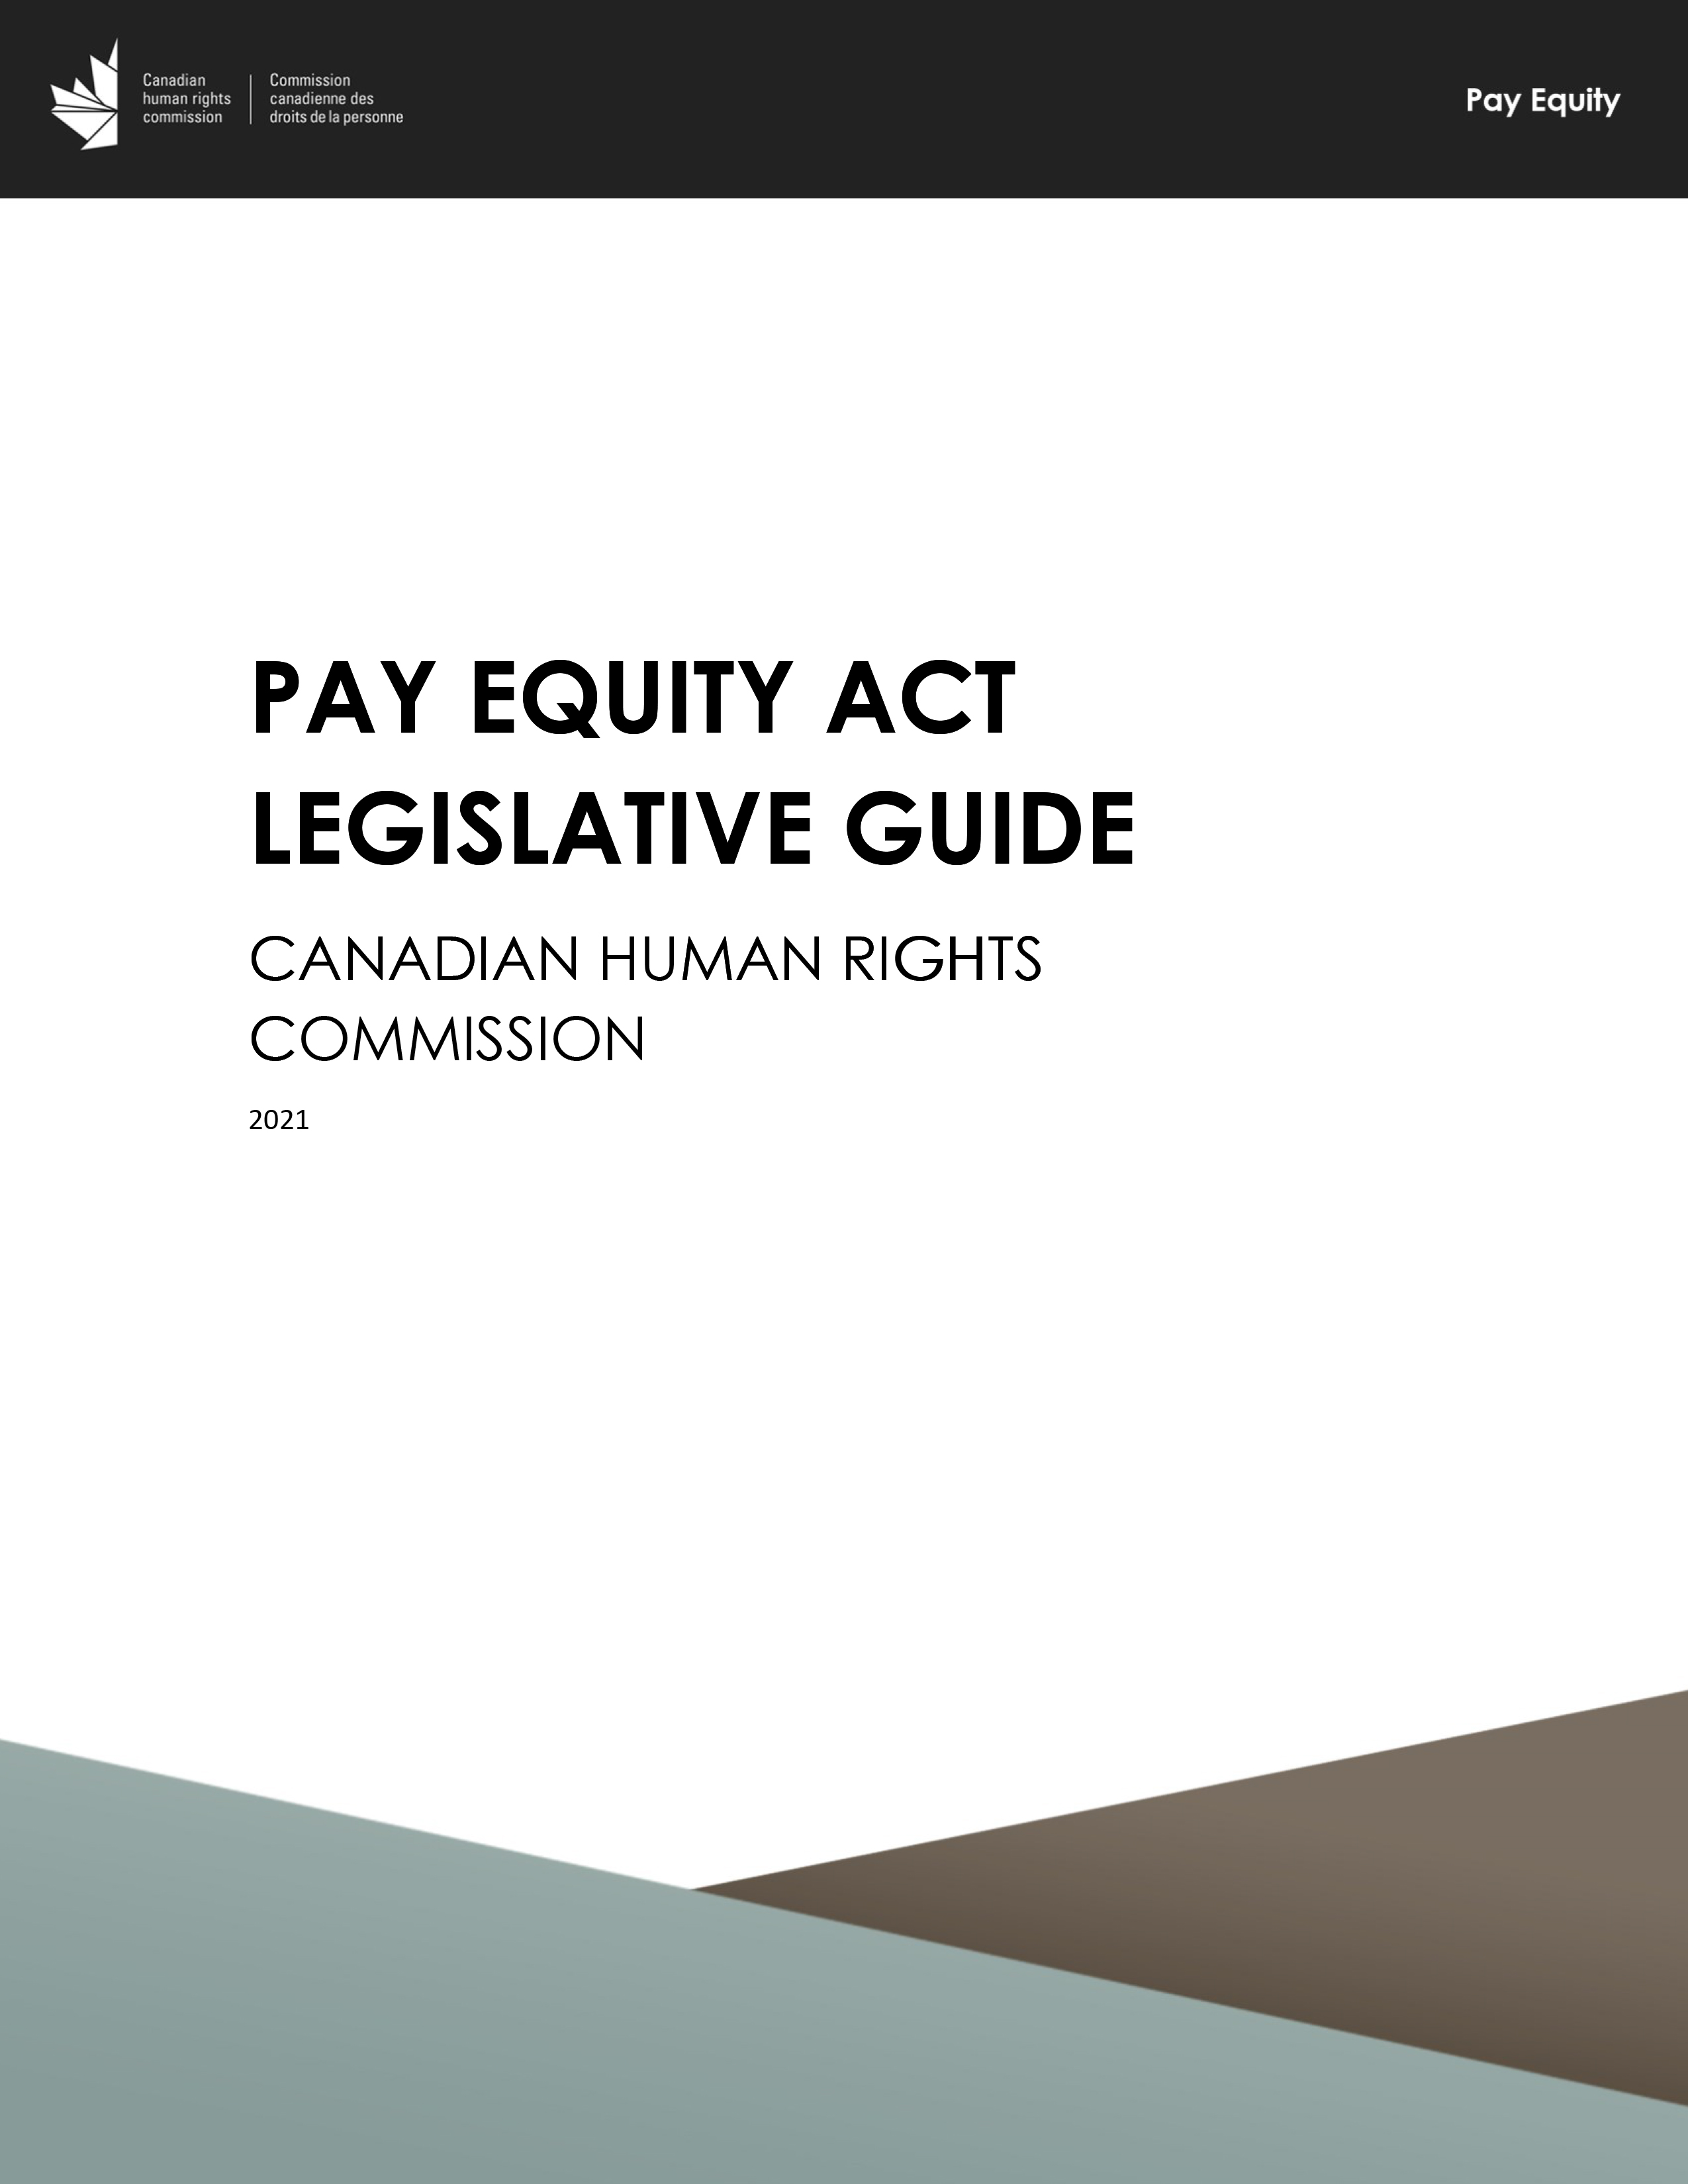 Pay Equity Act - Legislative Guide